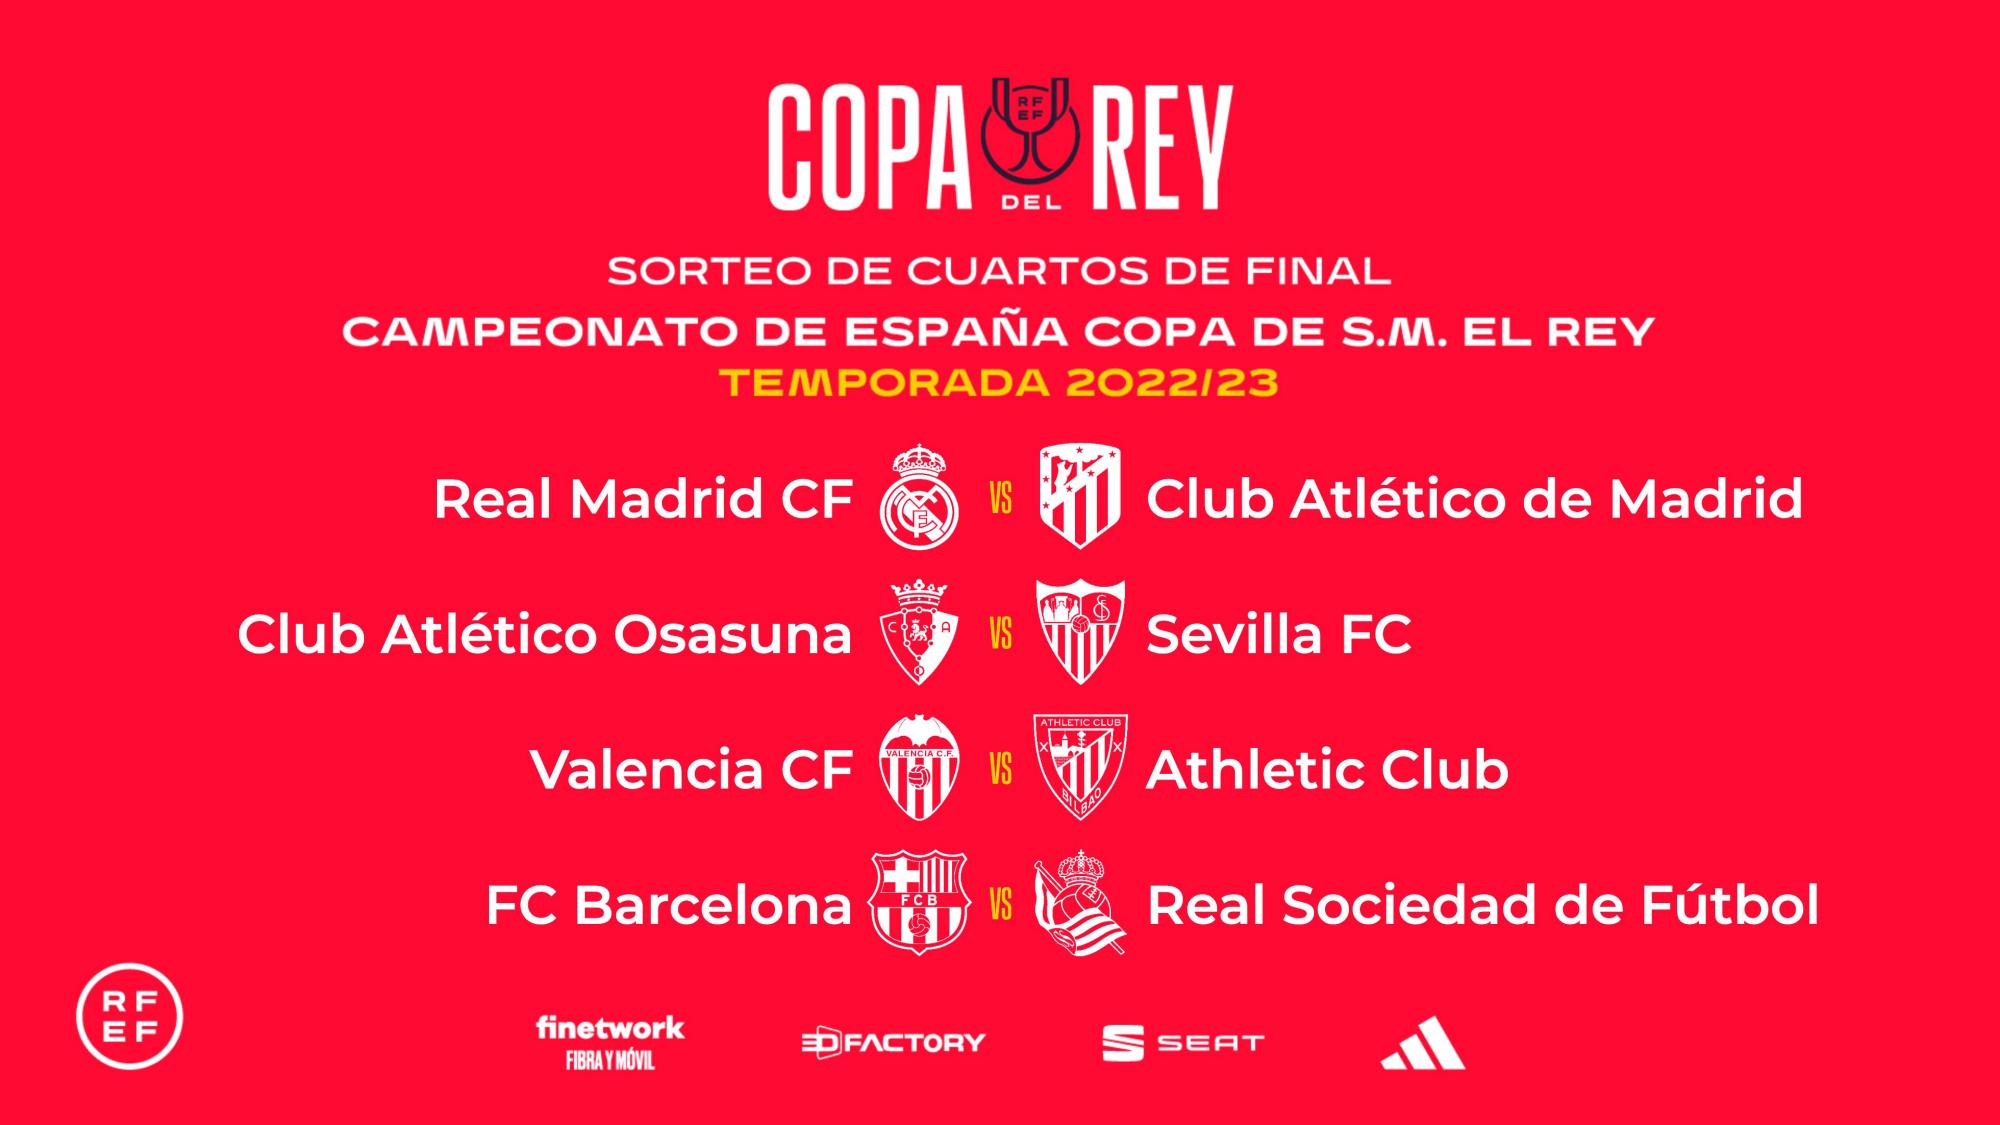 Thus were the crosses of the quarterfinals of the Copa del Rey.